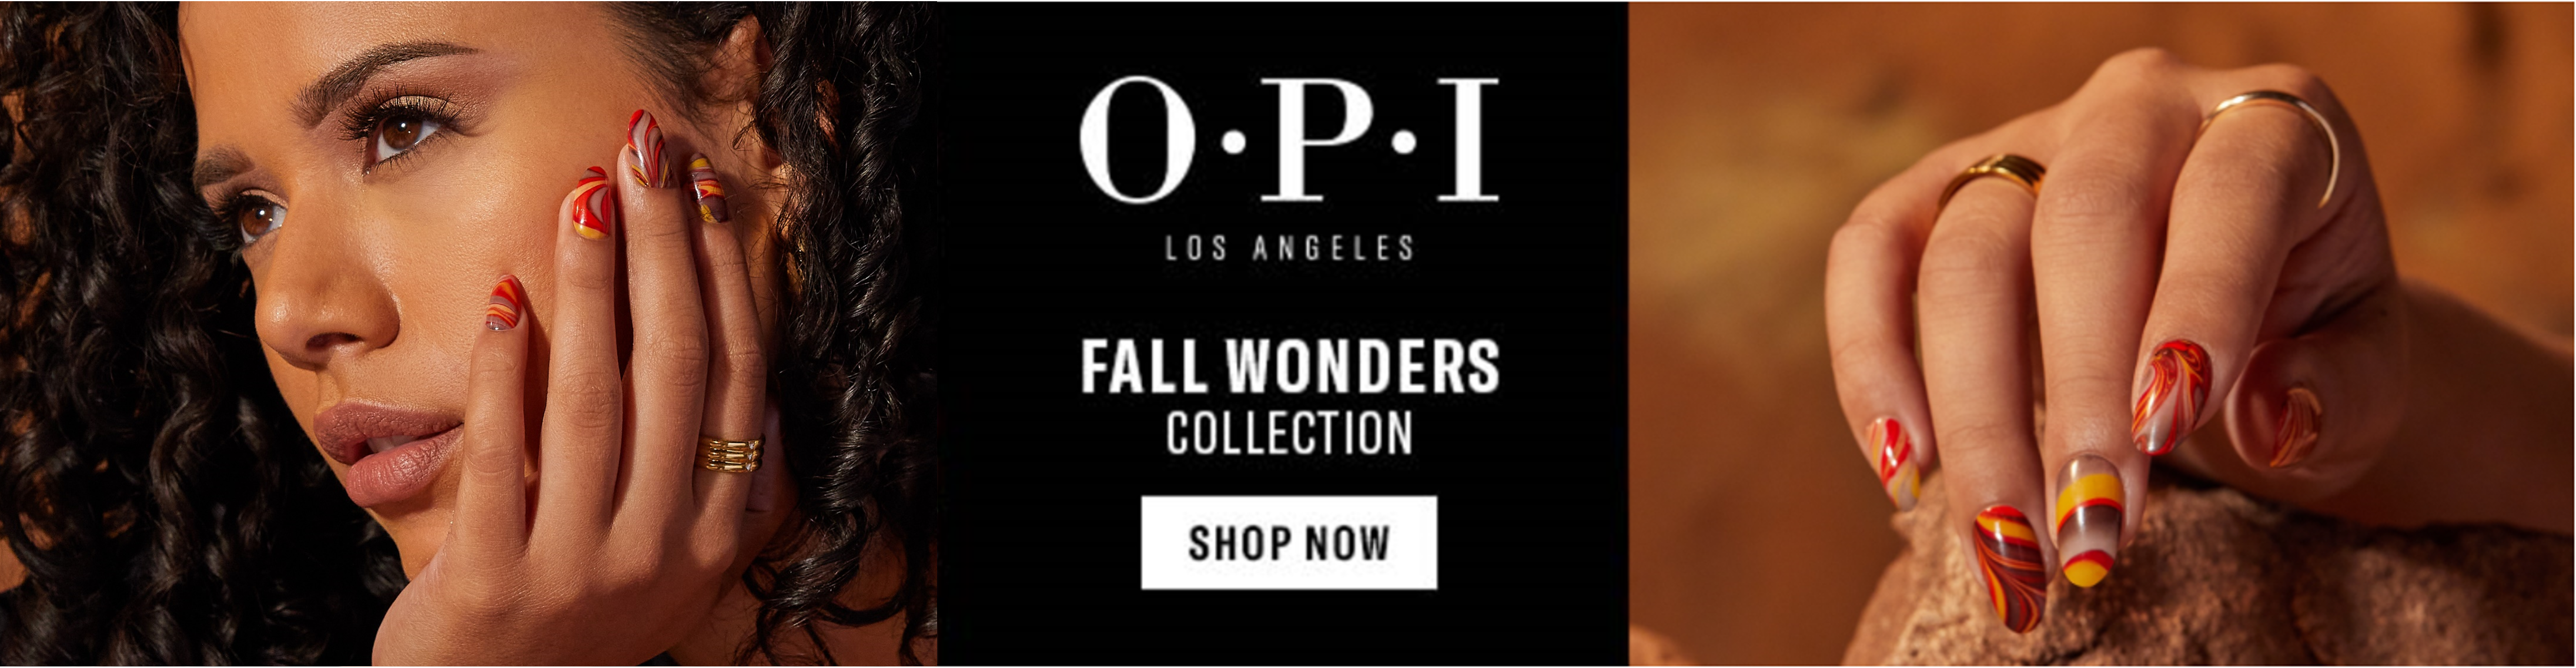 Fall Wonders Collection 